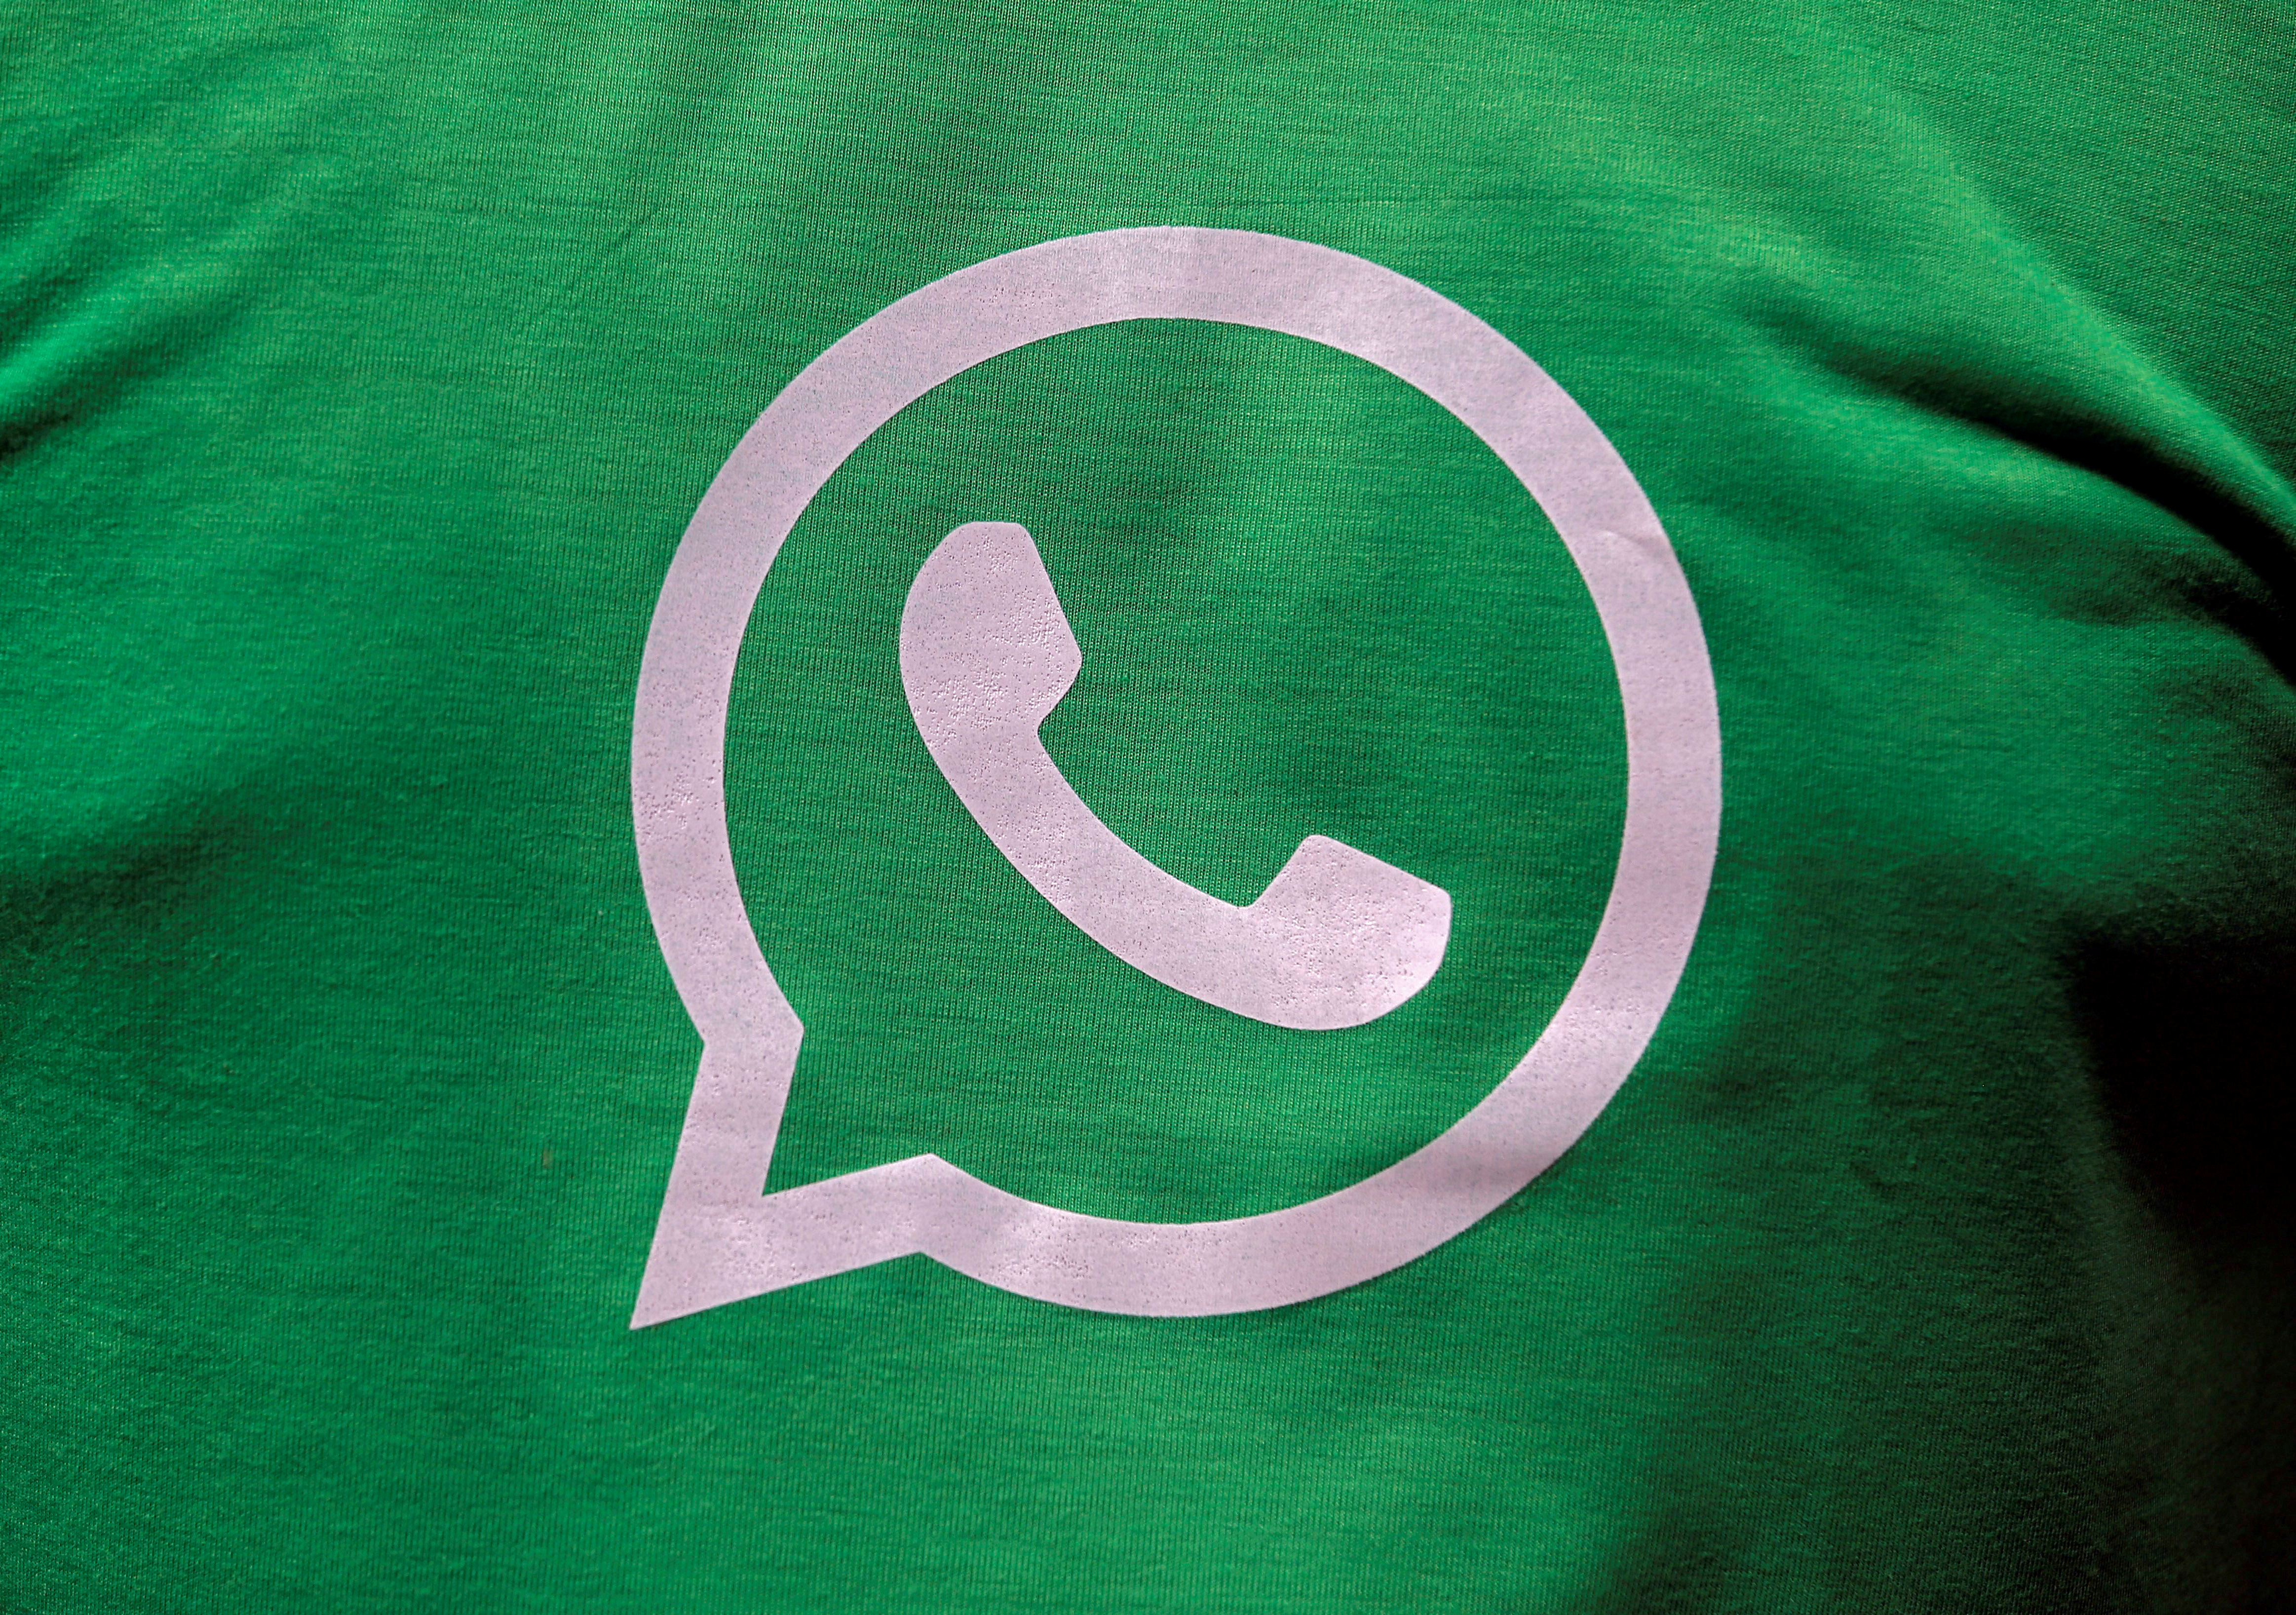 A logo of WhatsApp is pictured on a T-shirt worn by a WhatsApp-Reliance Jio representative during a drive by the two companies to educate users, on the outskirts of Kolkata, India, October 9, 2018. Picture taken October 9, 2018. REUTERS/Rupak De Chowdhuri/File Photo